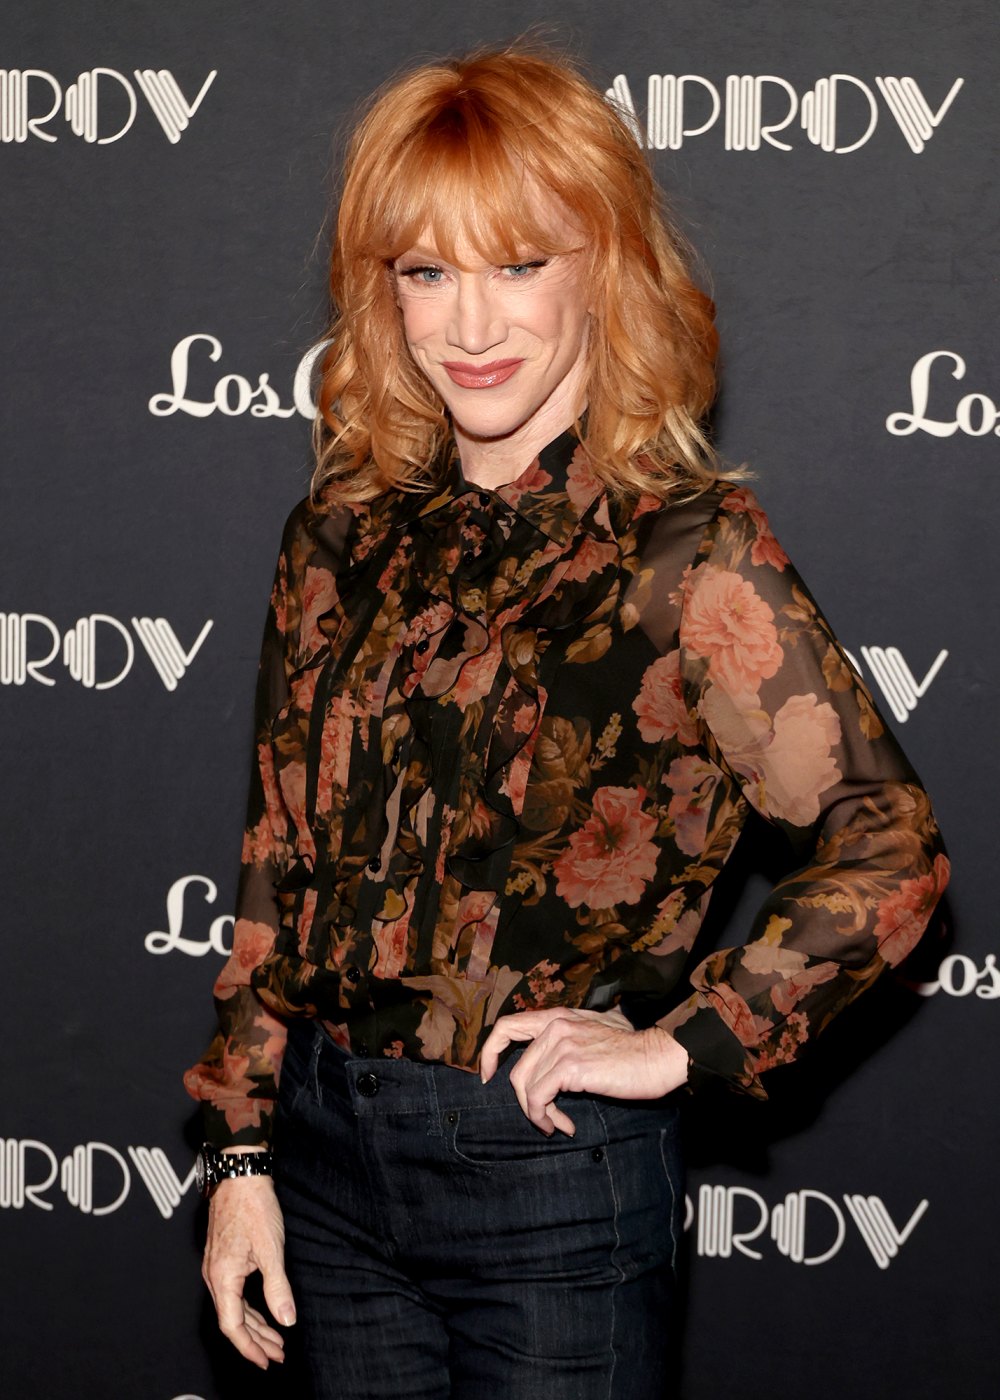 Kathy Griffin says 'F–k Valentine's Day' almost two months after Randy Bick's divorce filing